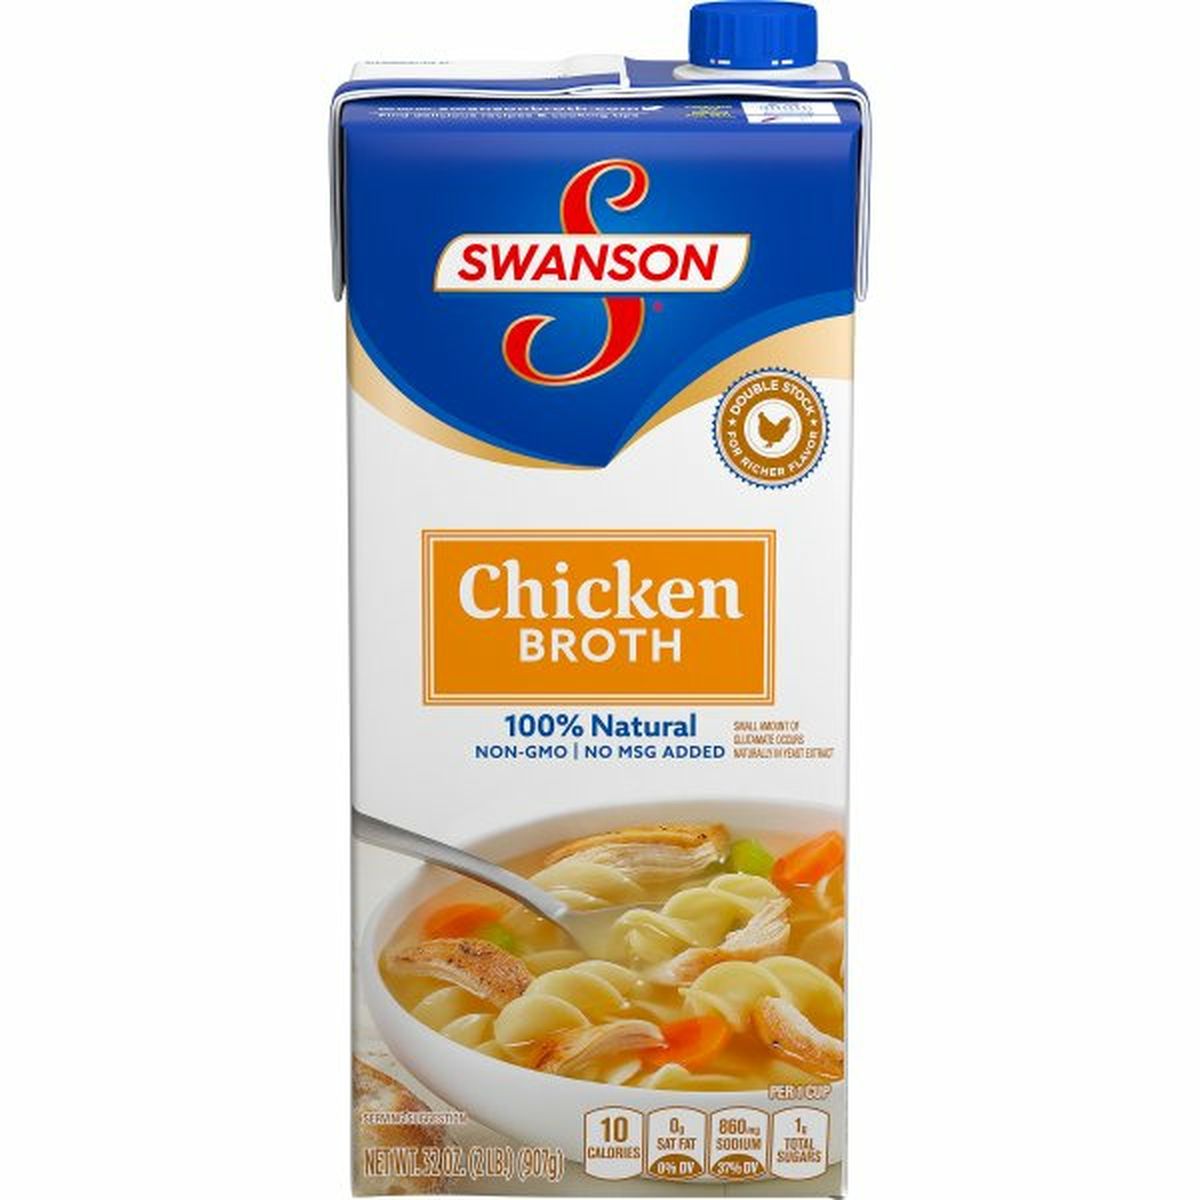 Calories in Swansons Chicken Broth